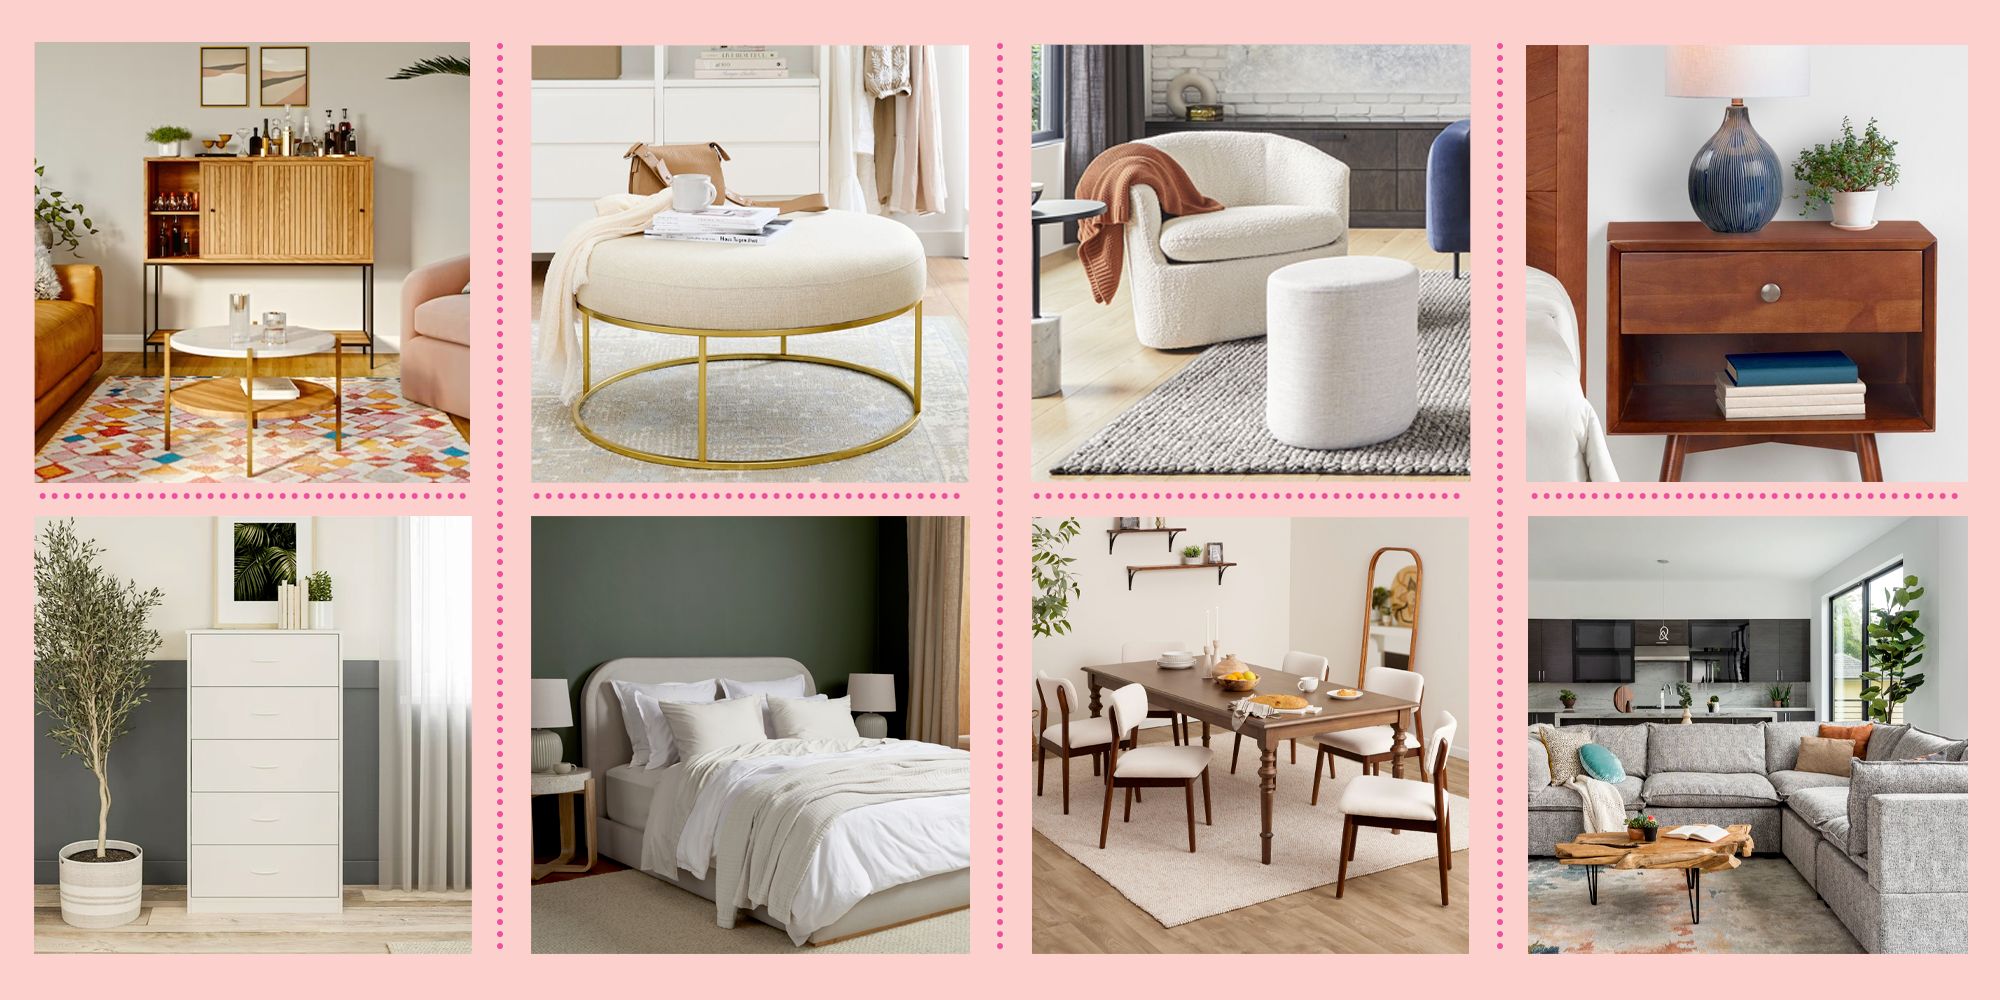 a collage of photos with furniture and decor